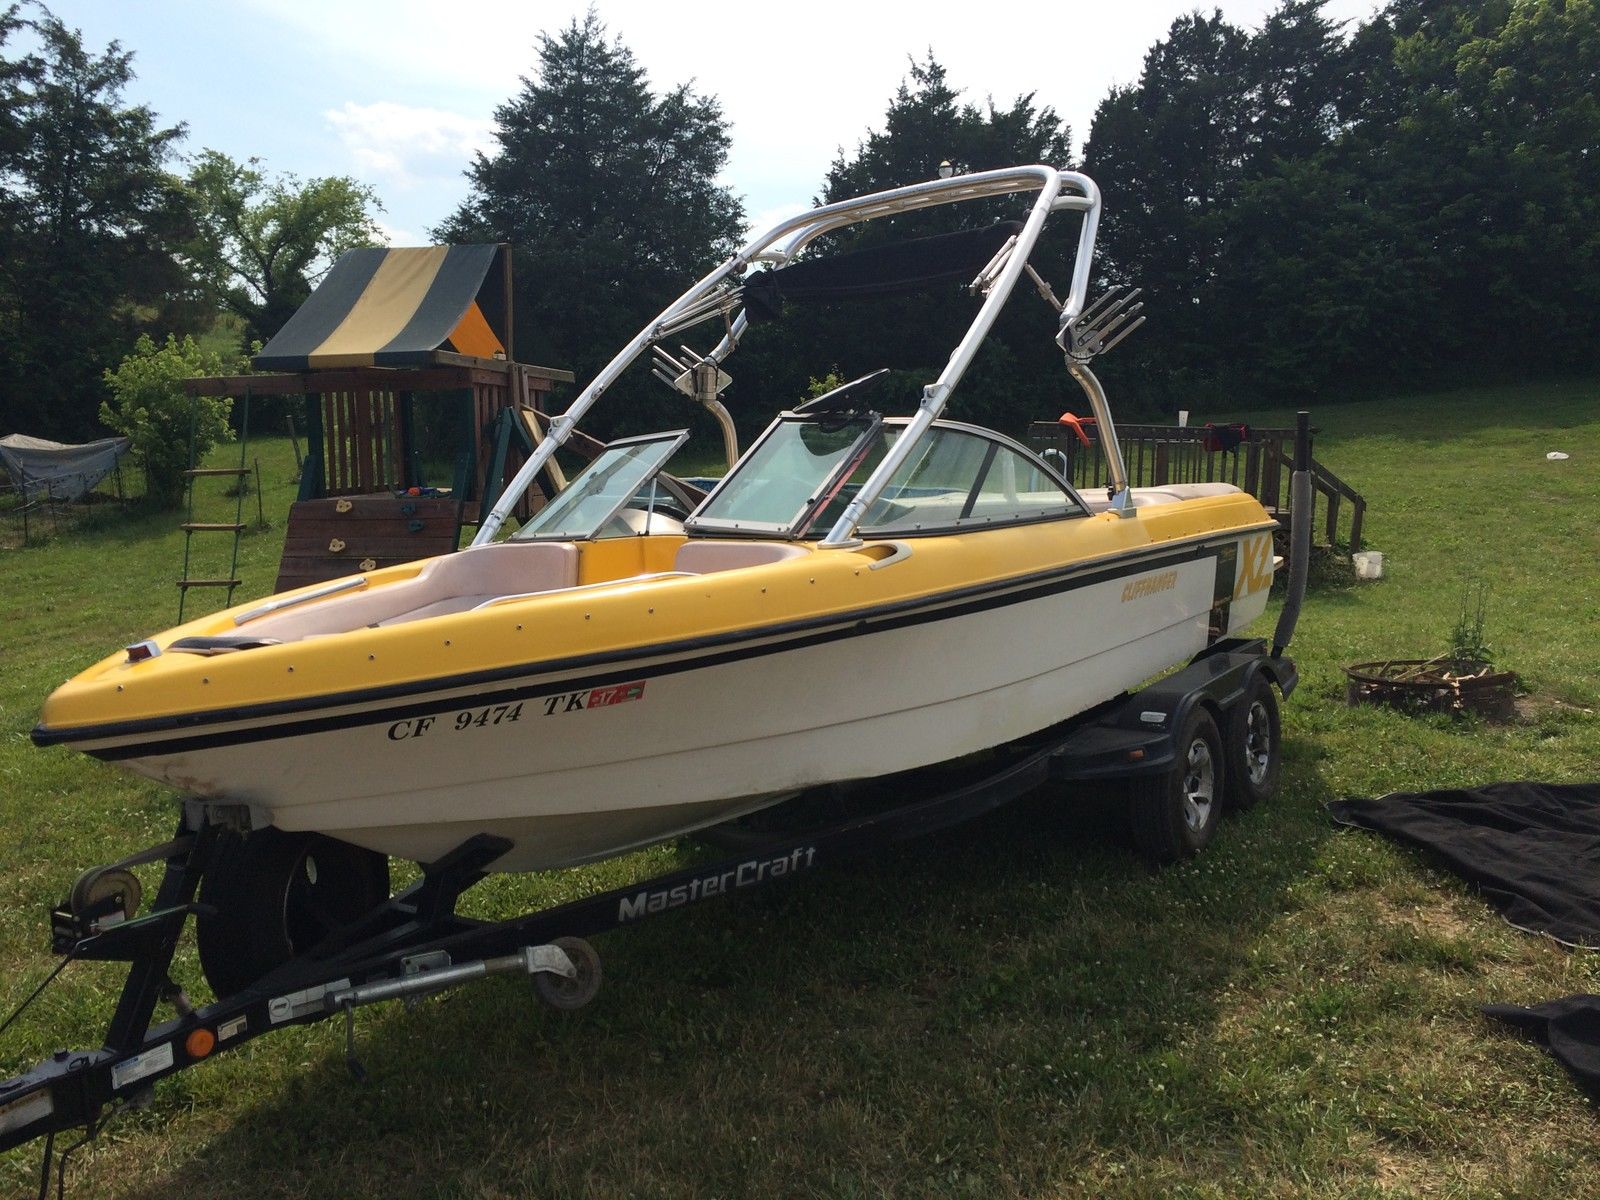 Mastercraft X1 2006 for sale for $18,500 - Boats-from-USA.com